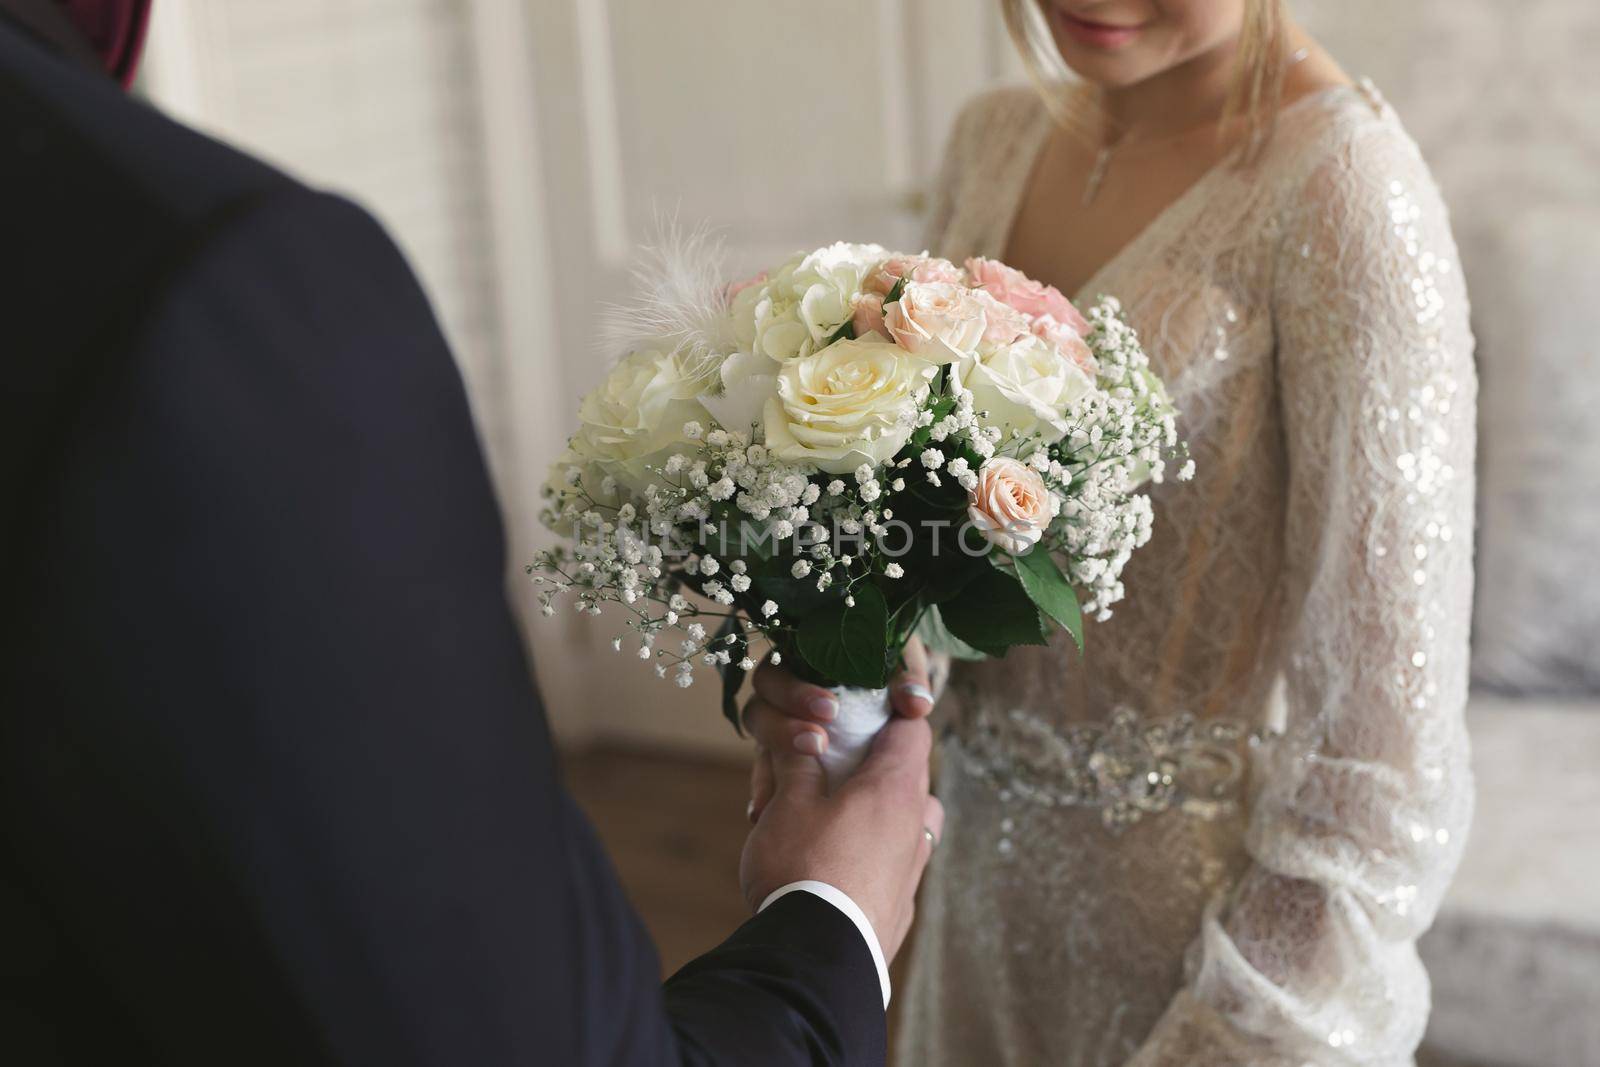 Groom gives the bride a bouquet of beautiful flowers by StudioPeace